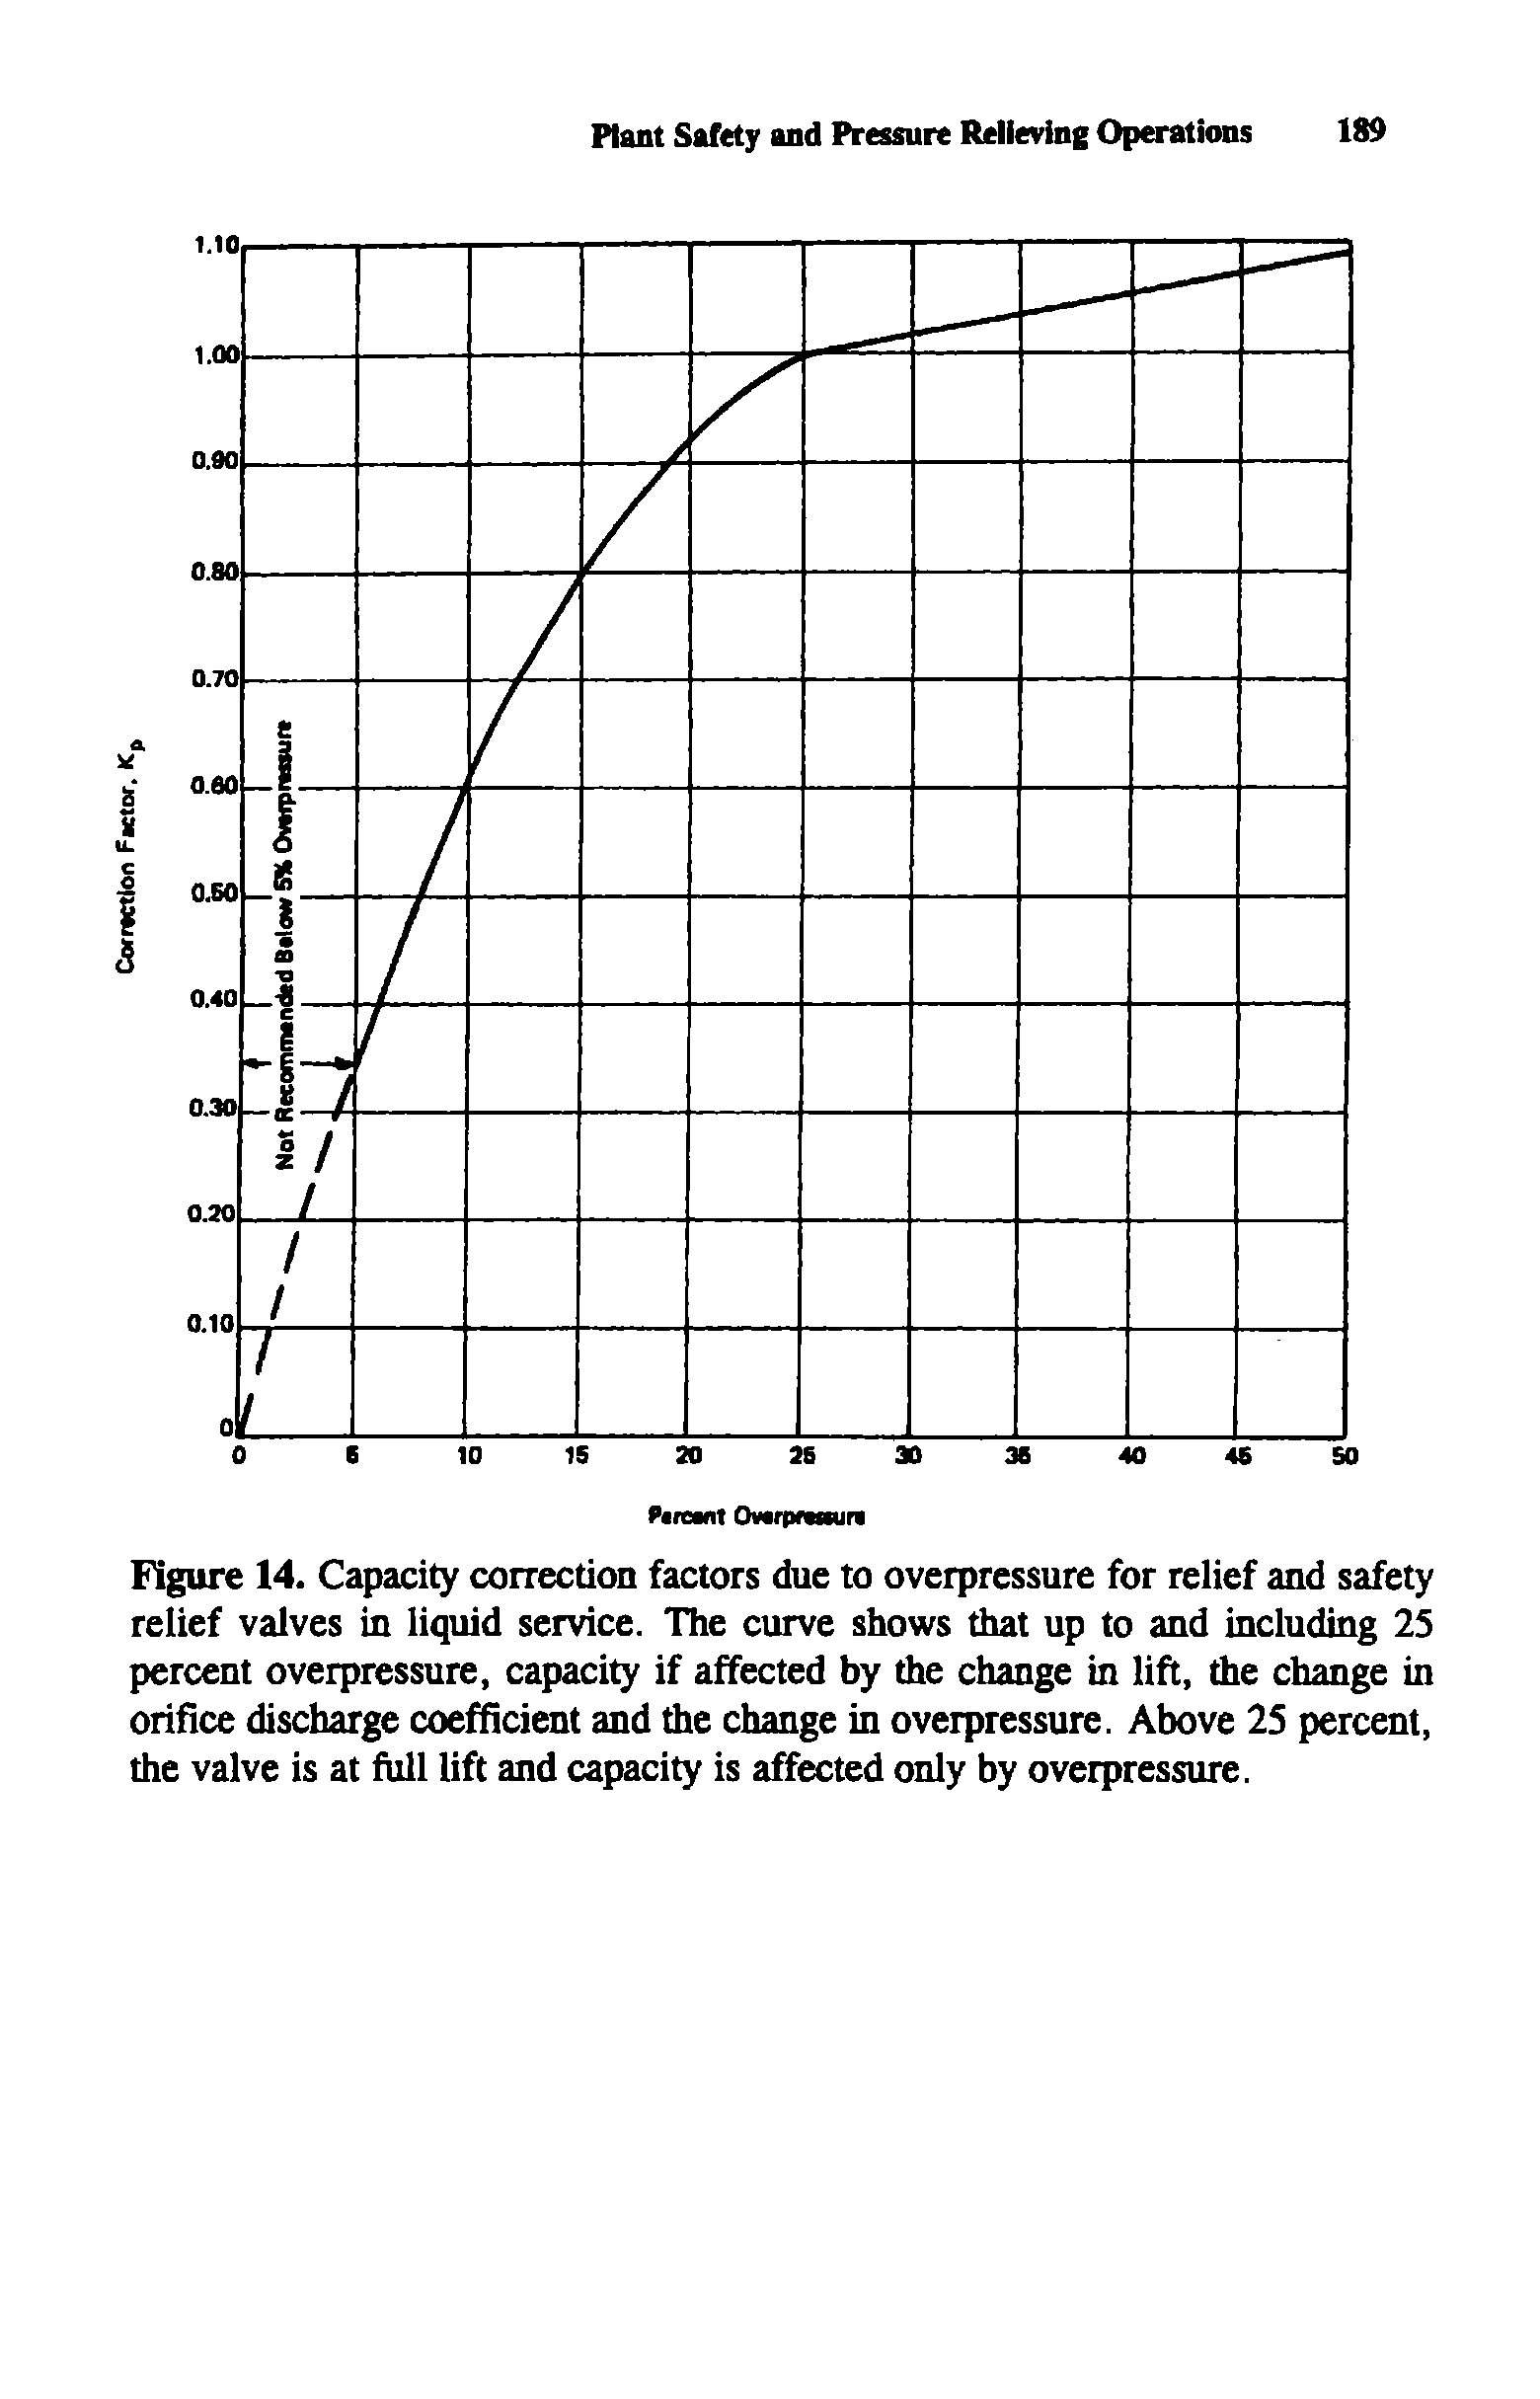 Figure 14. Capacity correction factors due to overpressure for relief and safety relief valves in liquid service. The curve shows that up to and including 25 percent overpressure, capacity if affected by the change in lift, the change in oriflce discharge coefficient and the change in overpressure. Above 25 percent, the valve is at fidl lift and capacity is affected only by overpressure.